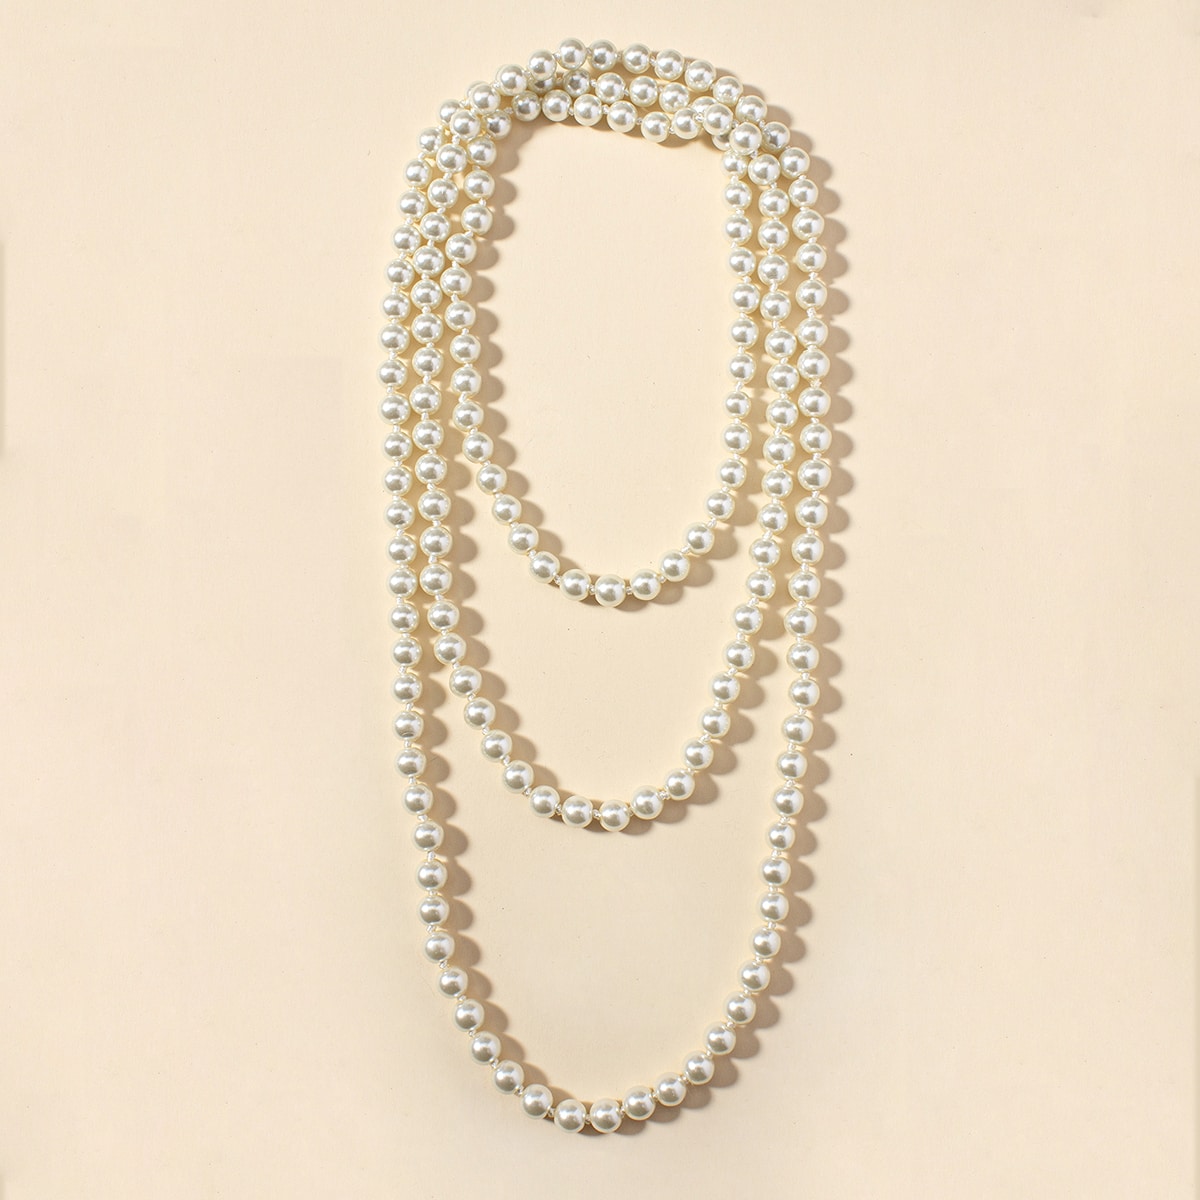 Shop A 150cm Long Knotted Bead Necklace Women's Accessories